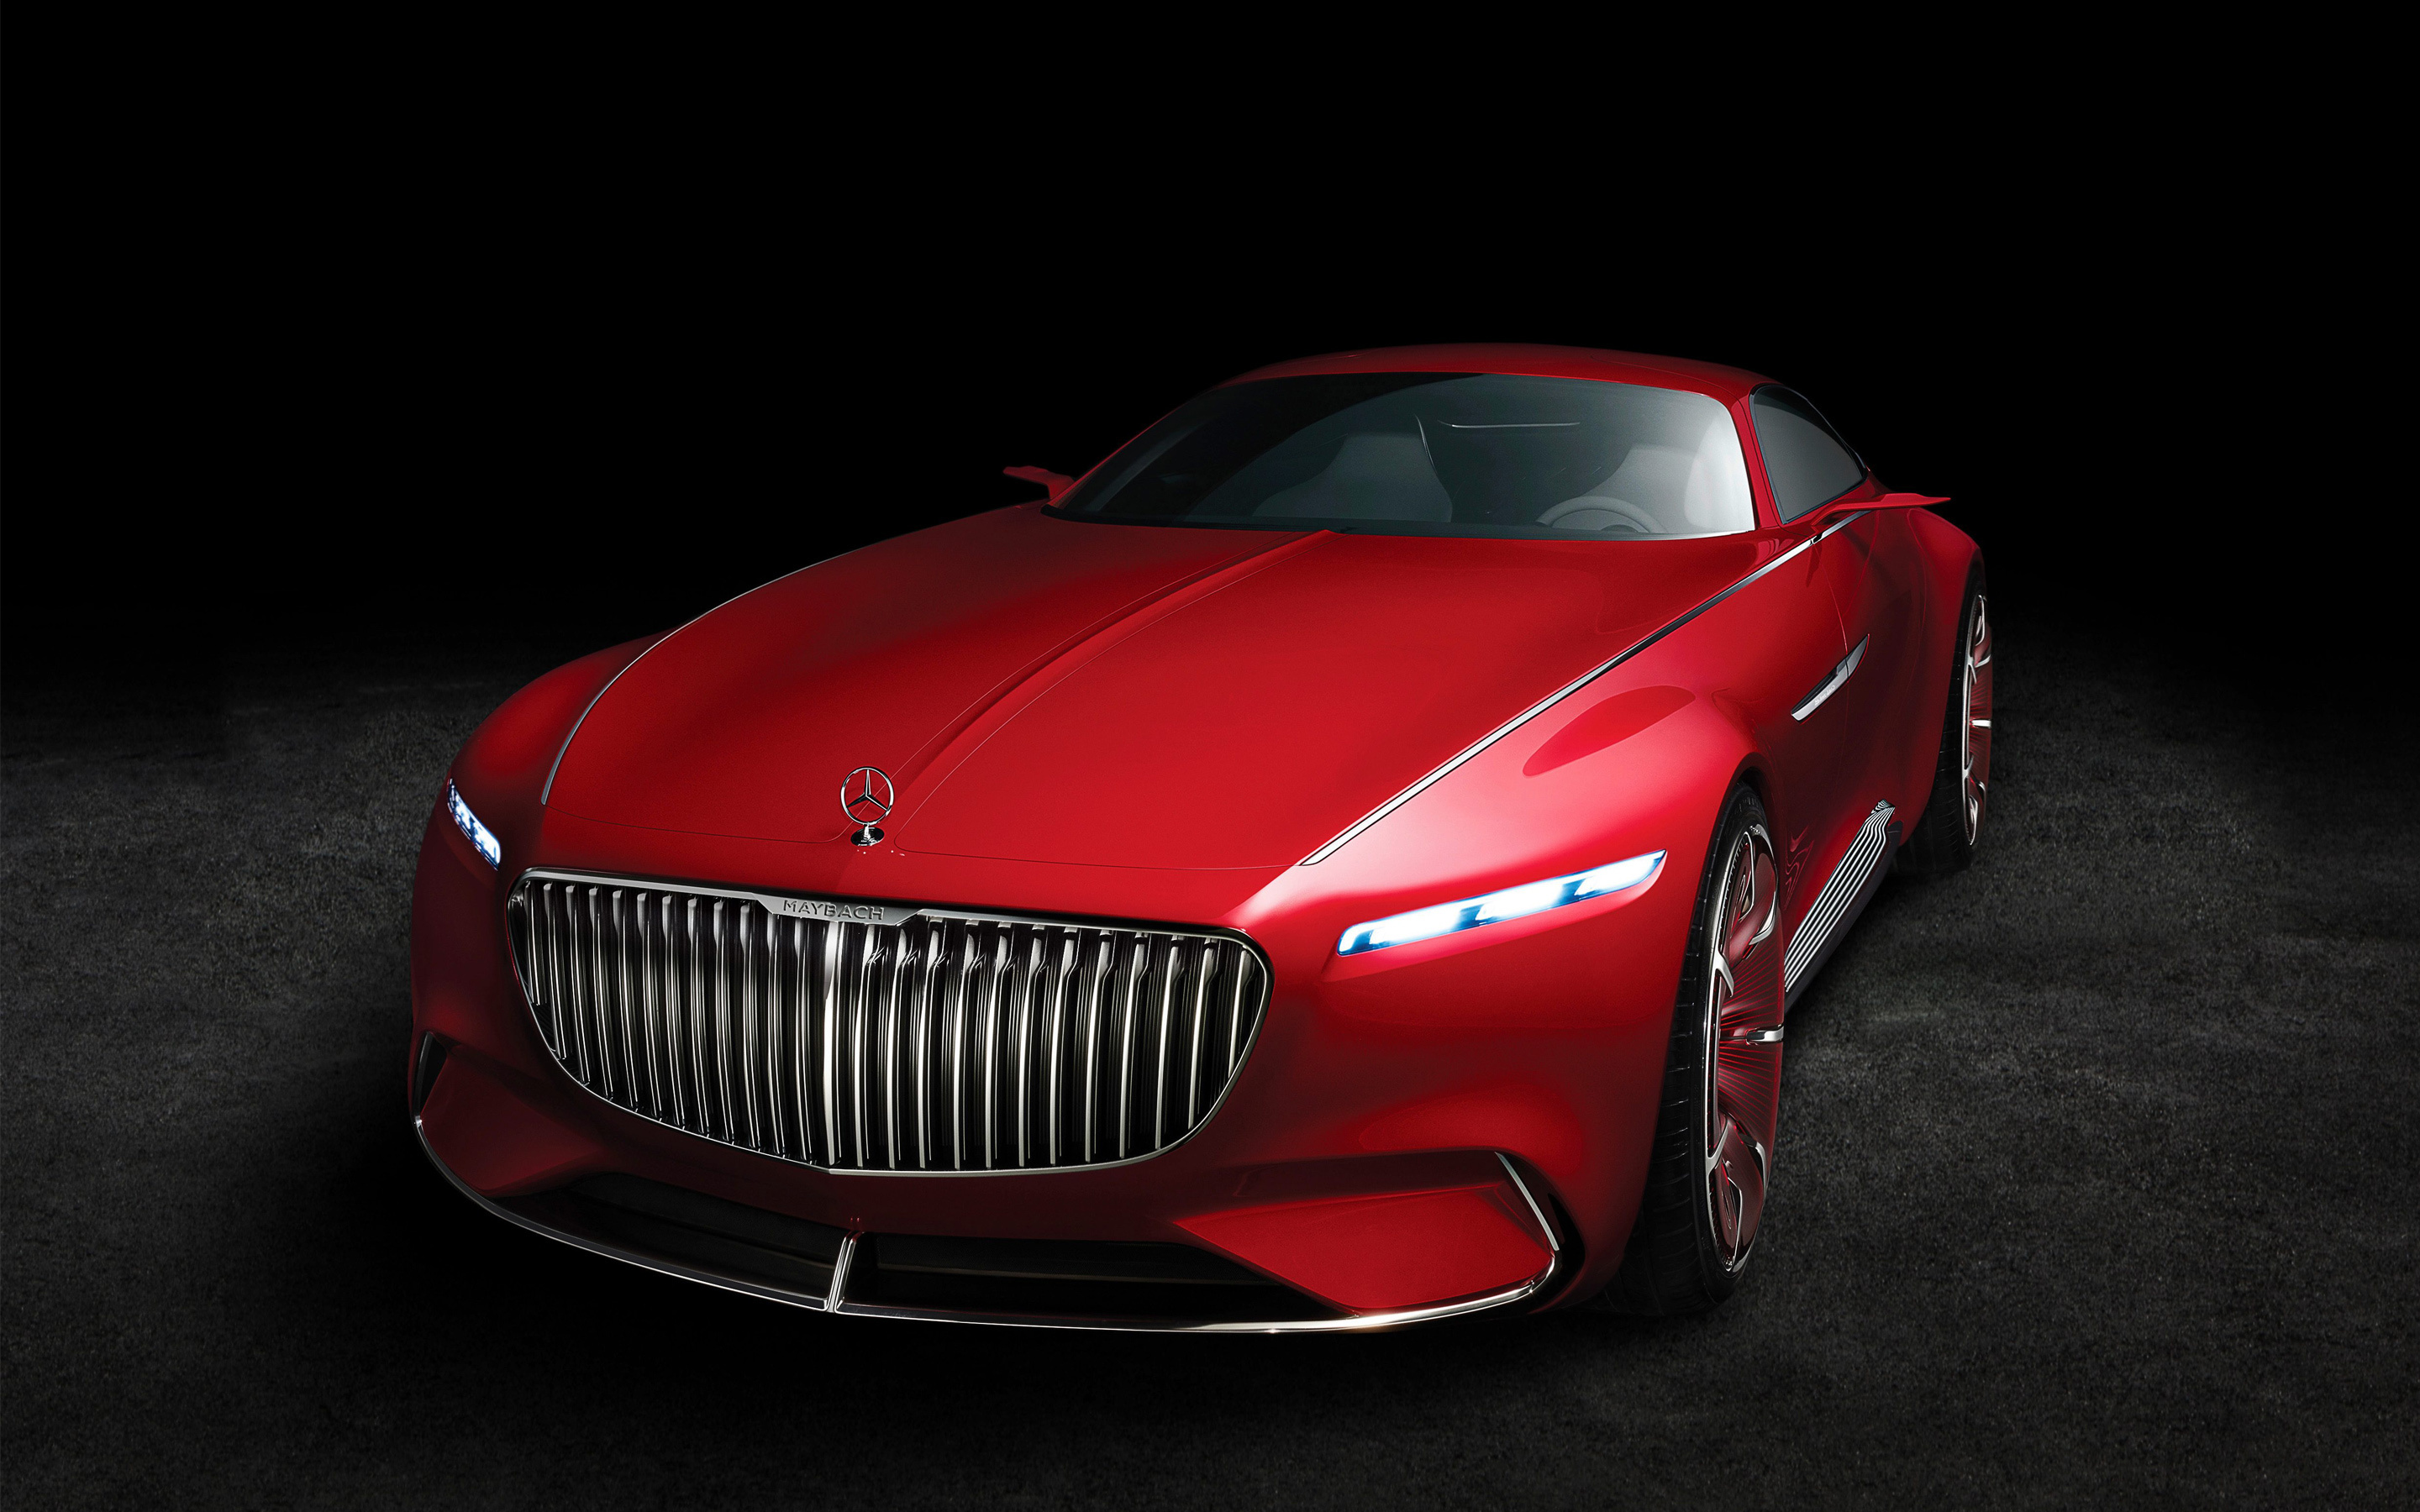 Red, front, Vision Mercedes-maybach, 2880x1800 wallpaper